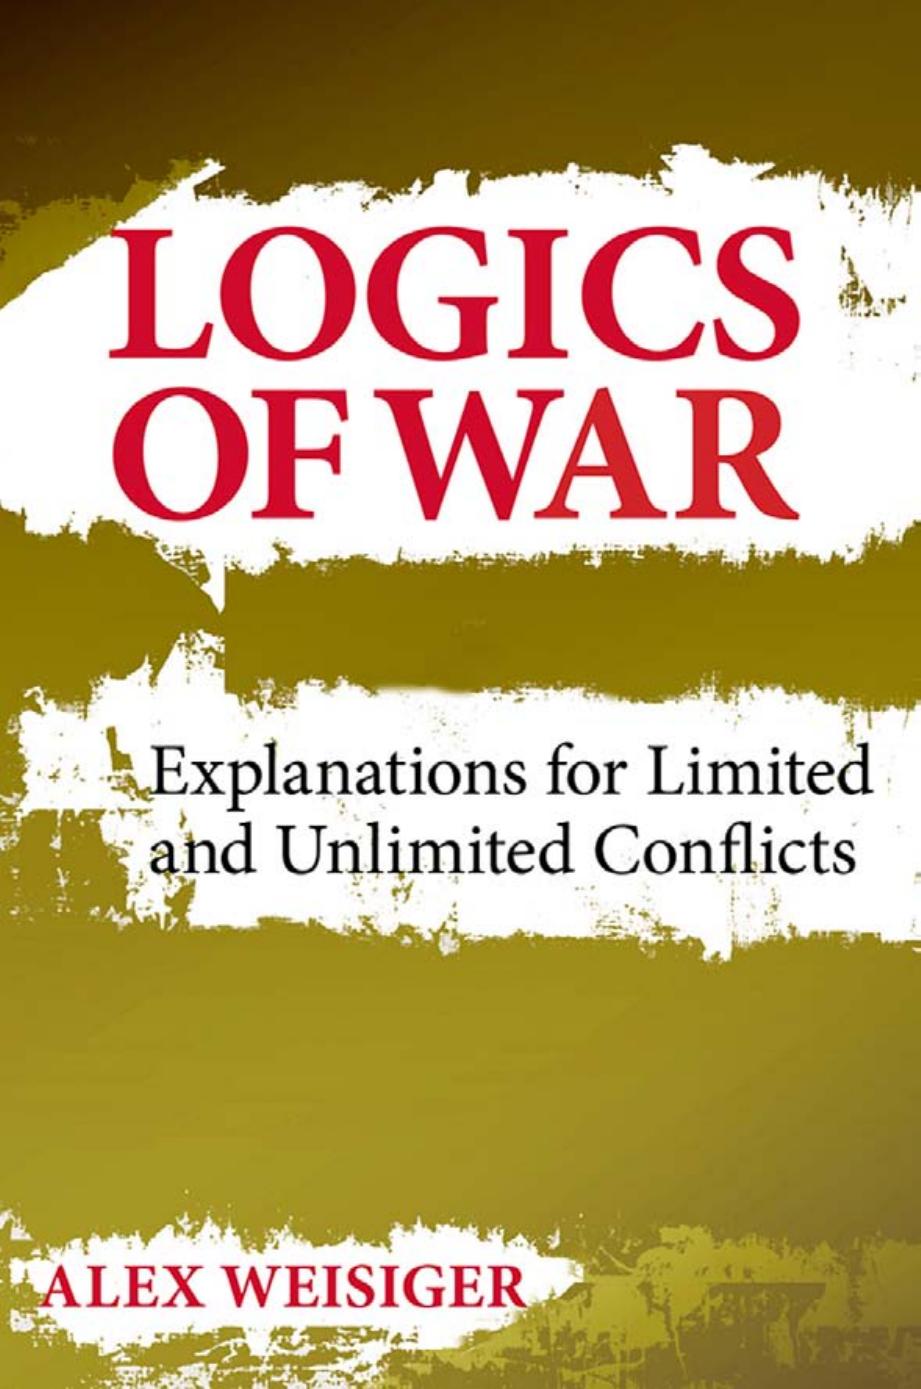 Logics of War: Explanations for Limited and Unlimited Conflicts by by Alex Weisiger